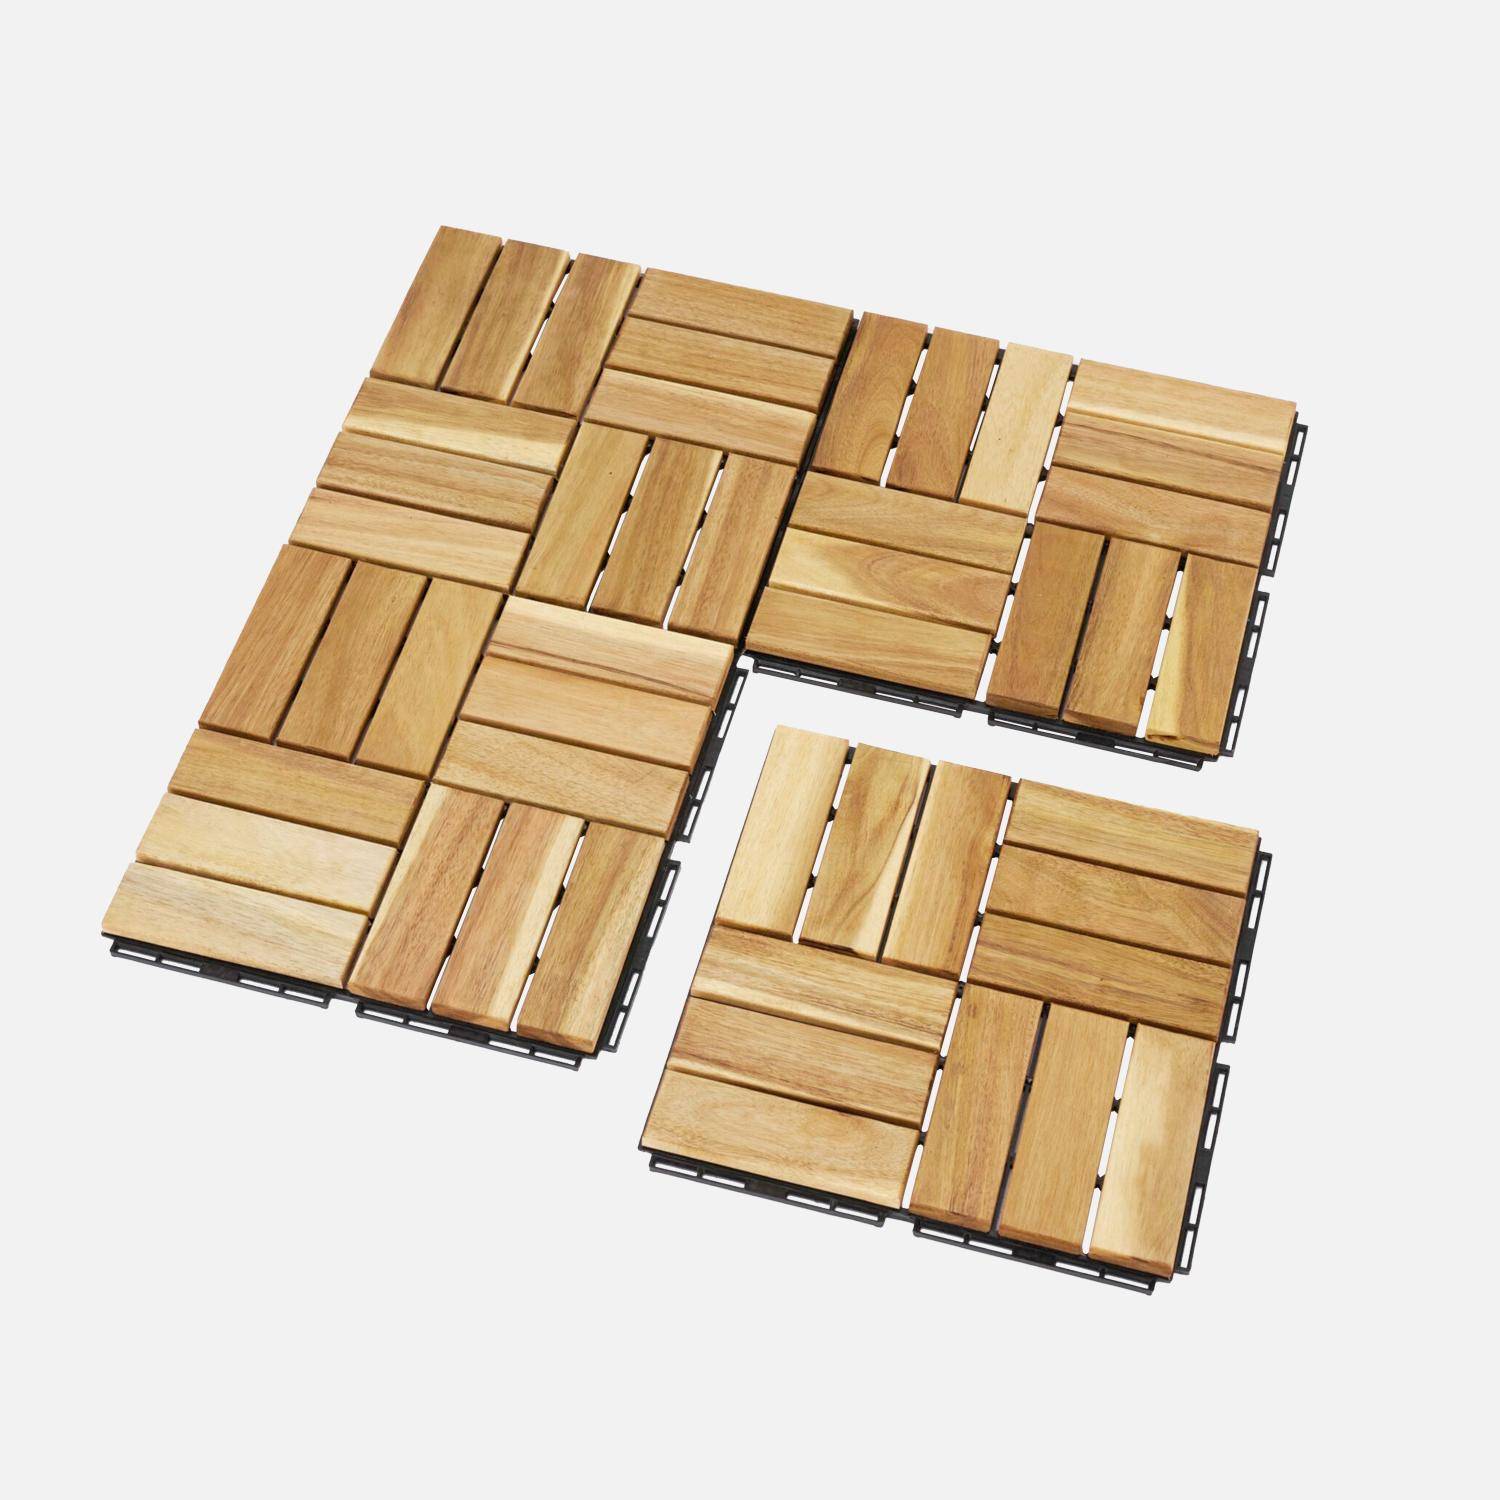 Batch of 36 acacia wood decking tiles 30x30cm, square pattern, clip-on,sweeek,Photo3